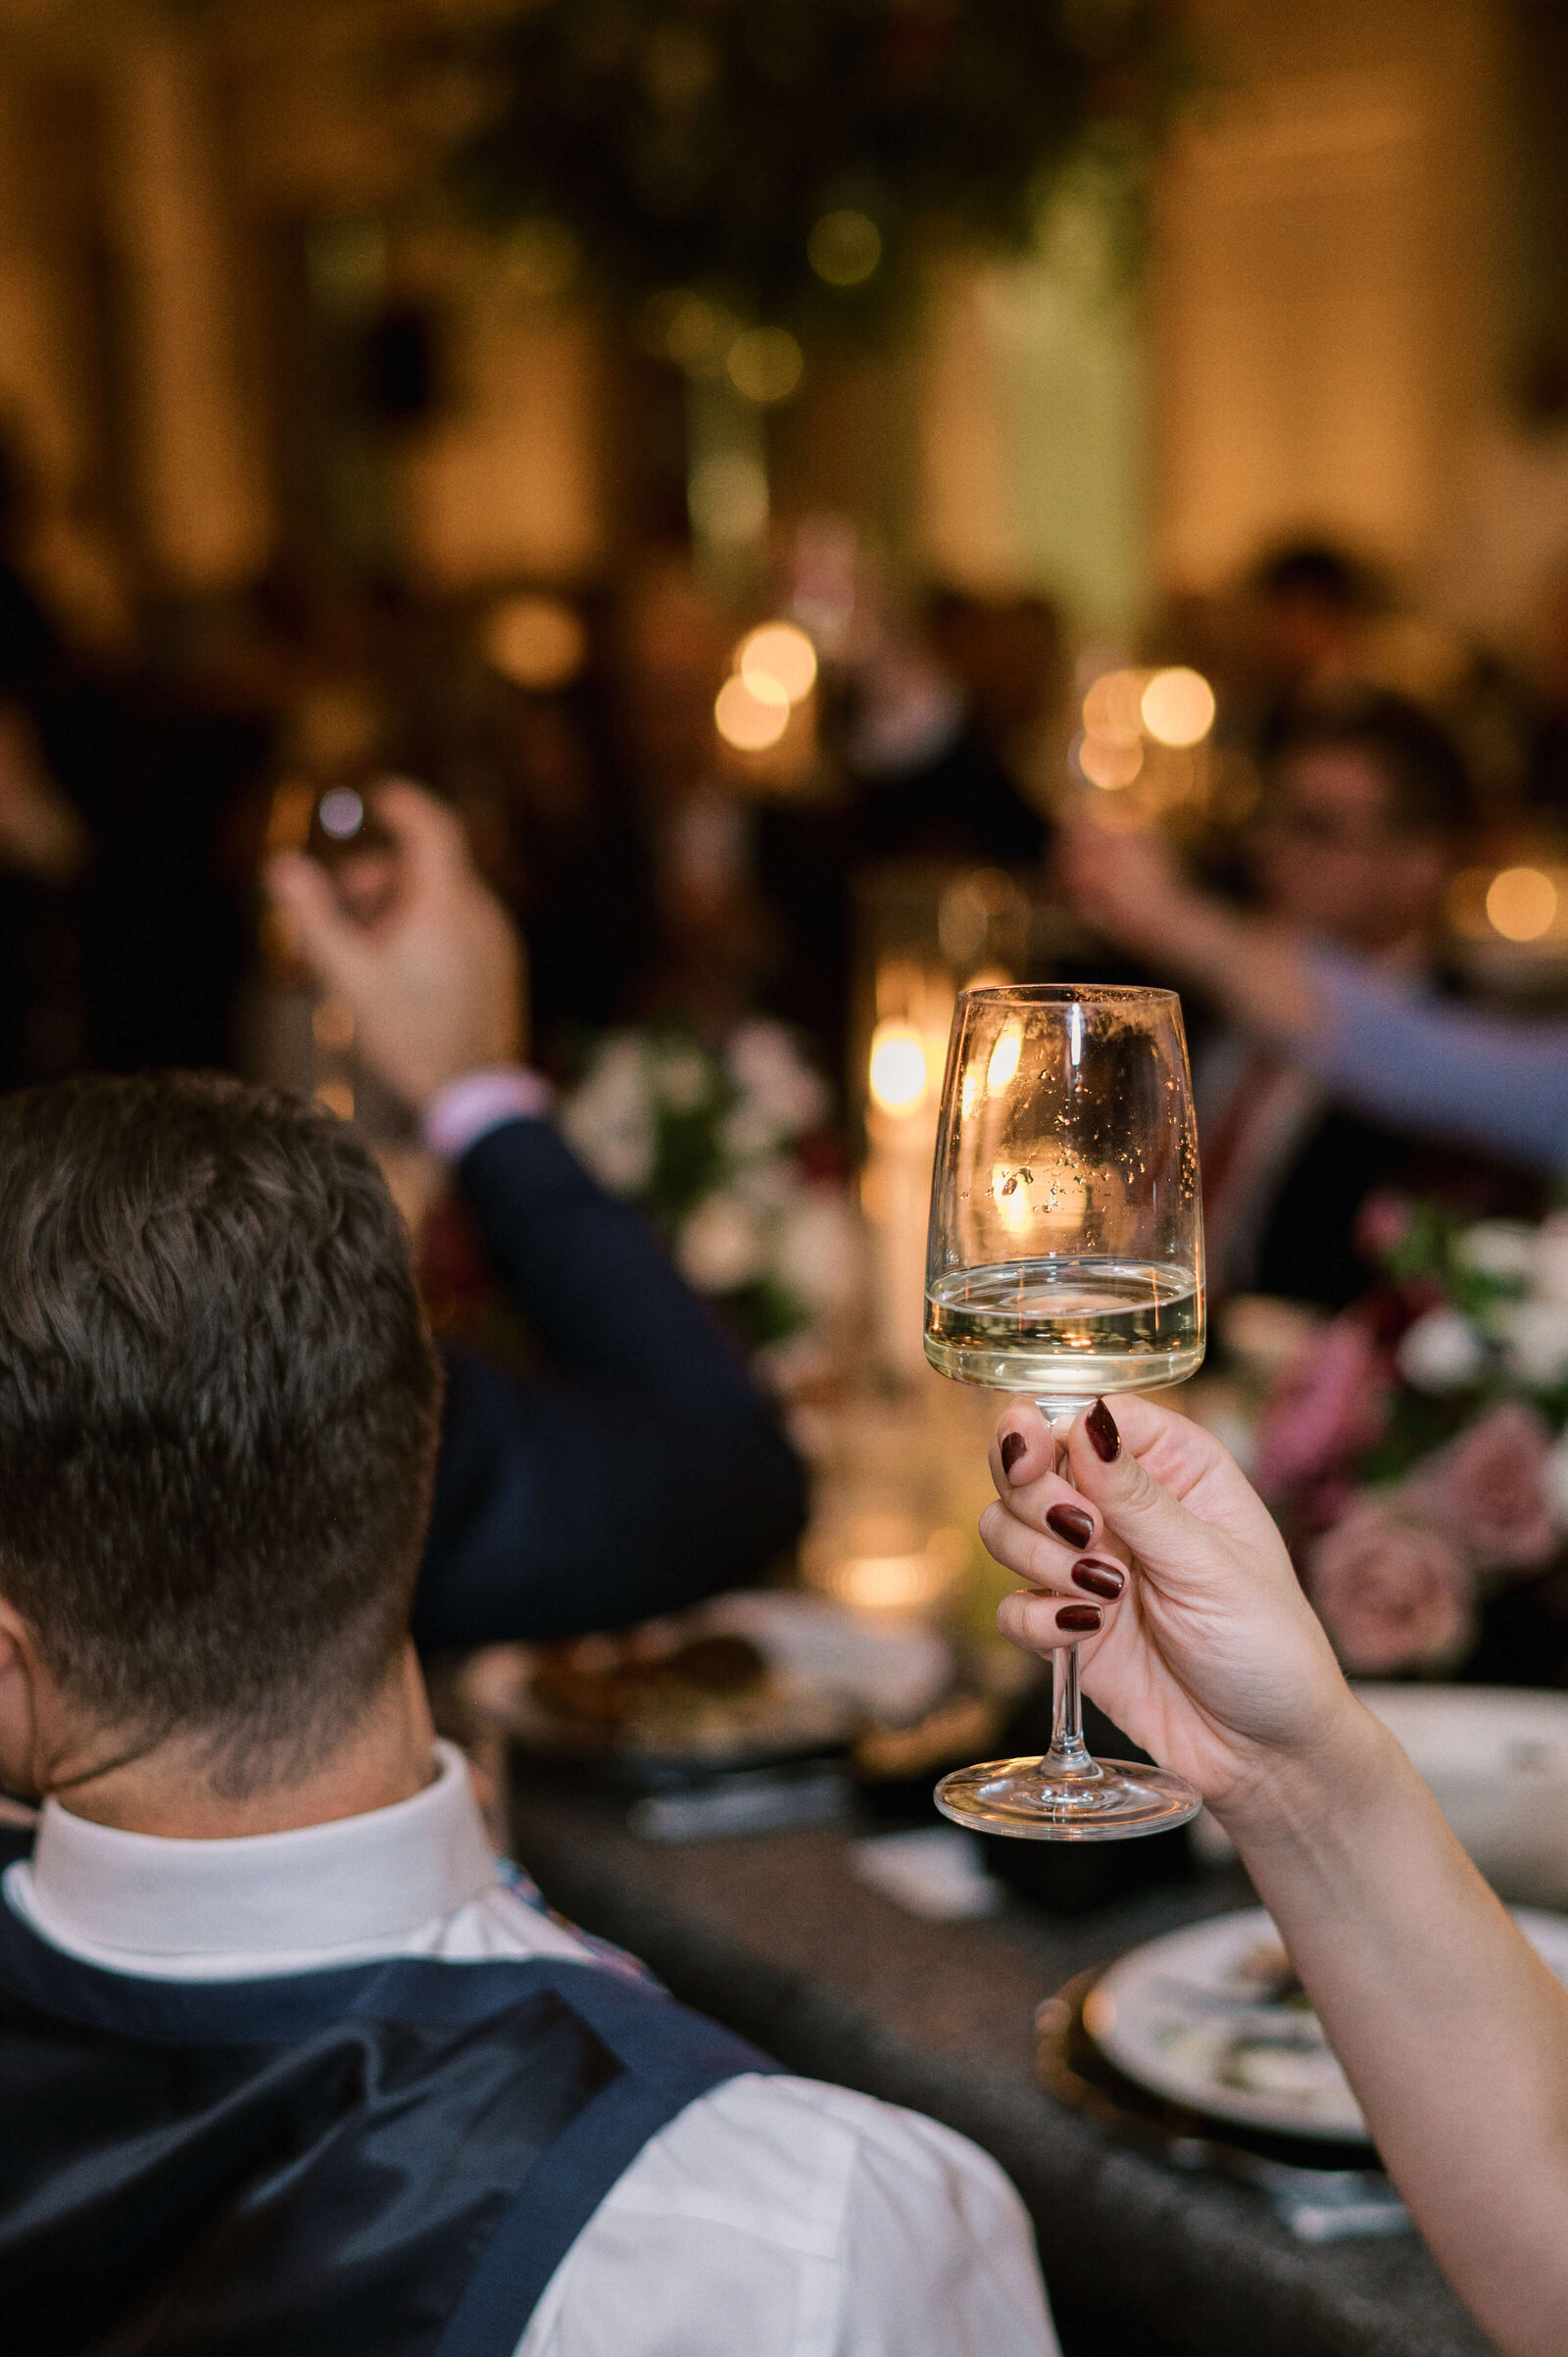 A glass of wine is raised in toast at a Virginia wedding